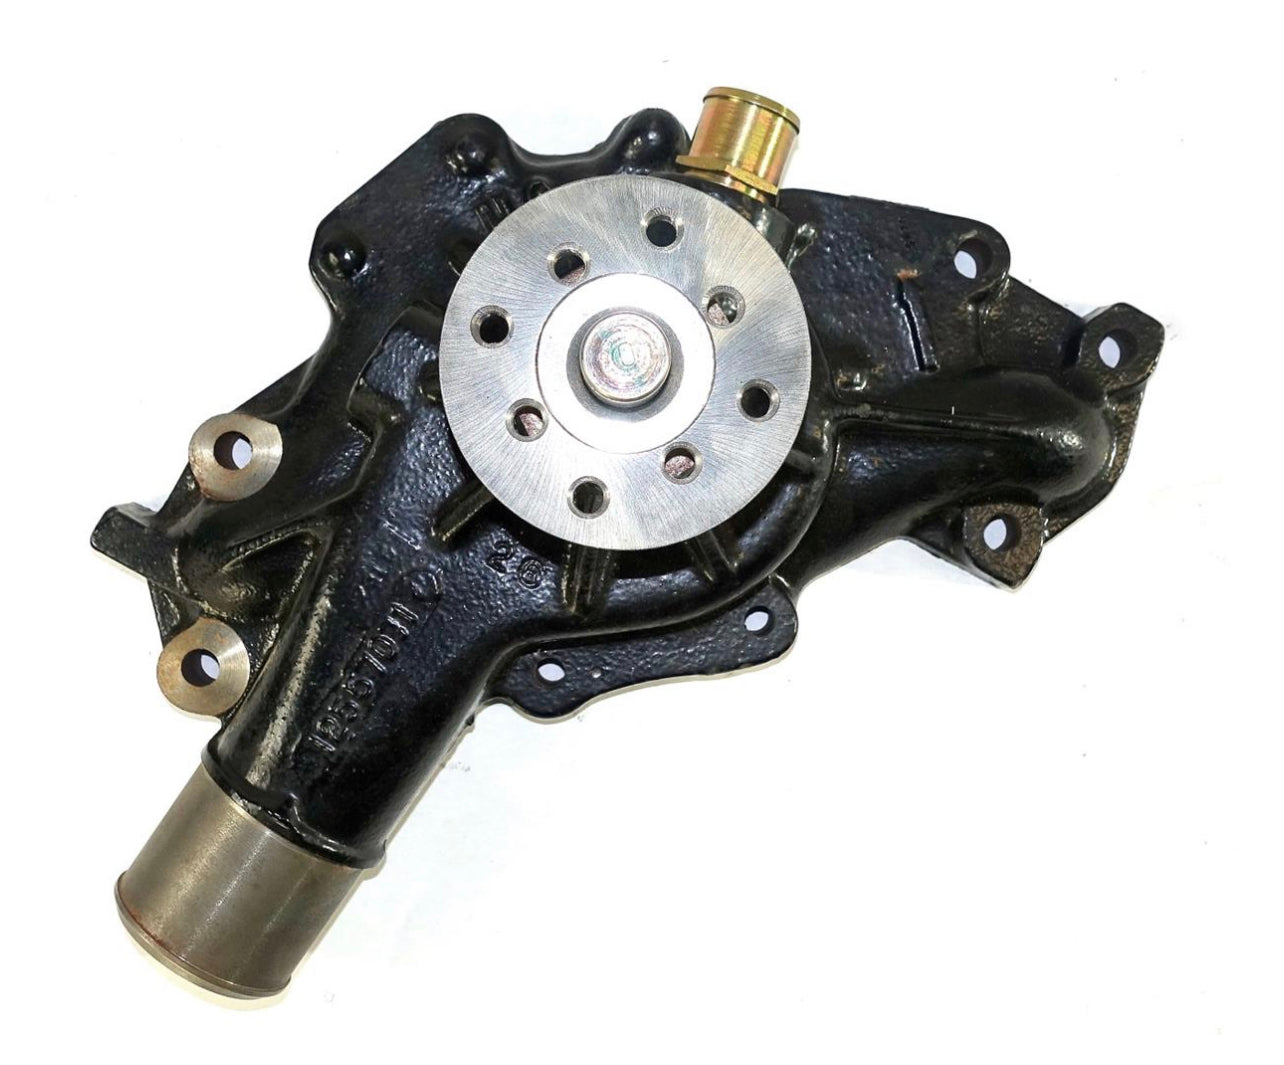 Water Pump for 6.5L Turbo Engine fits Humvee